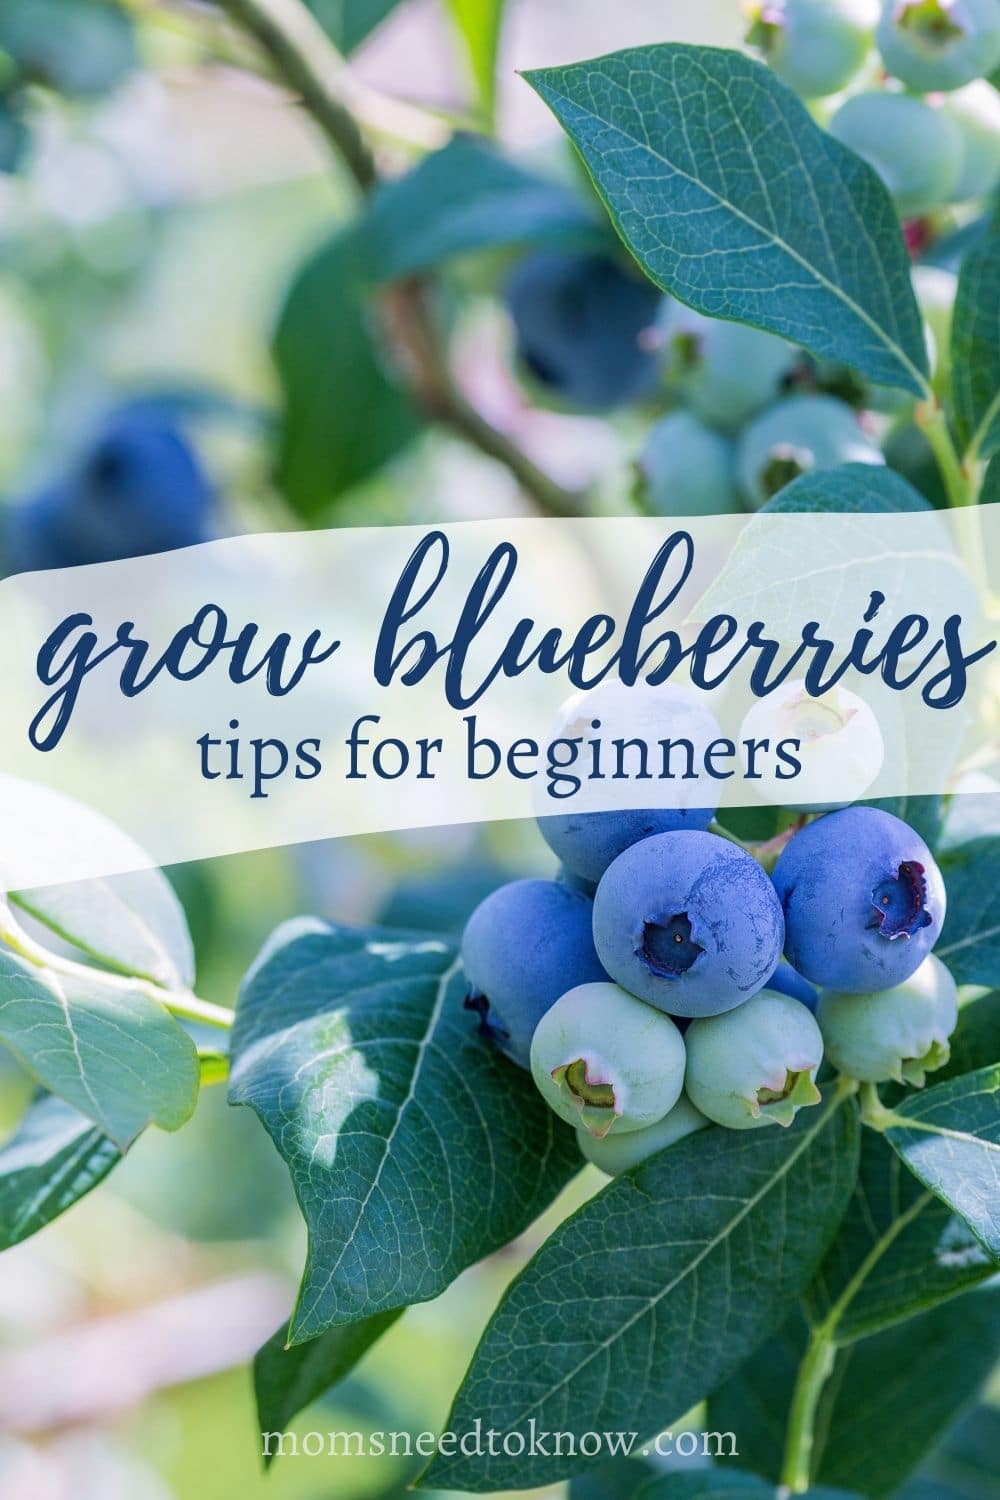 How To Grow Blueberries | Moms Need To Know